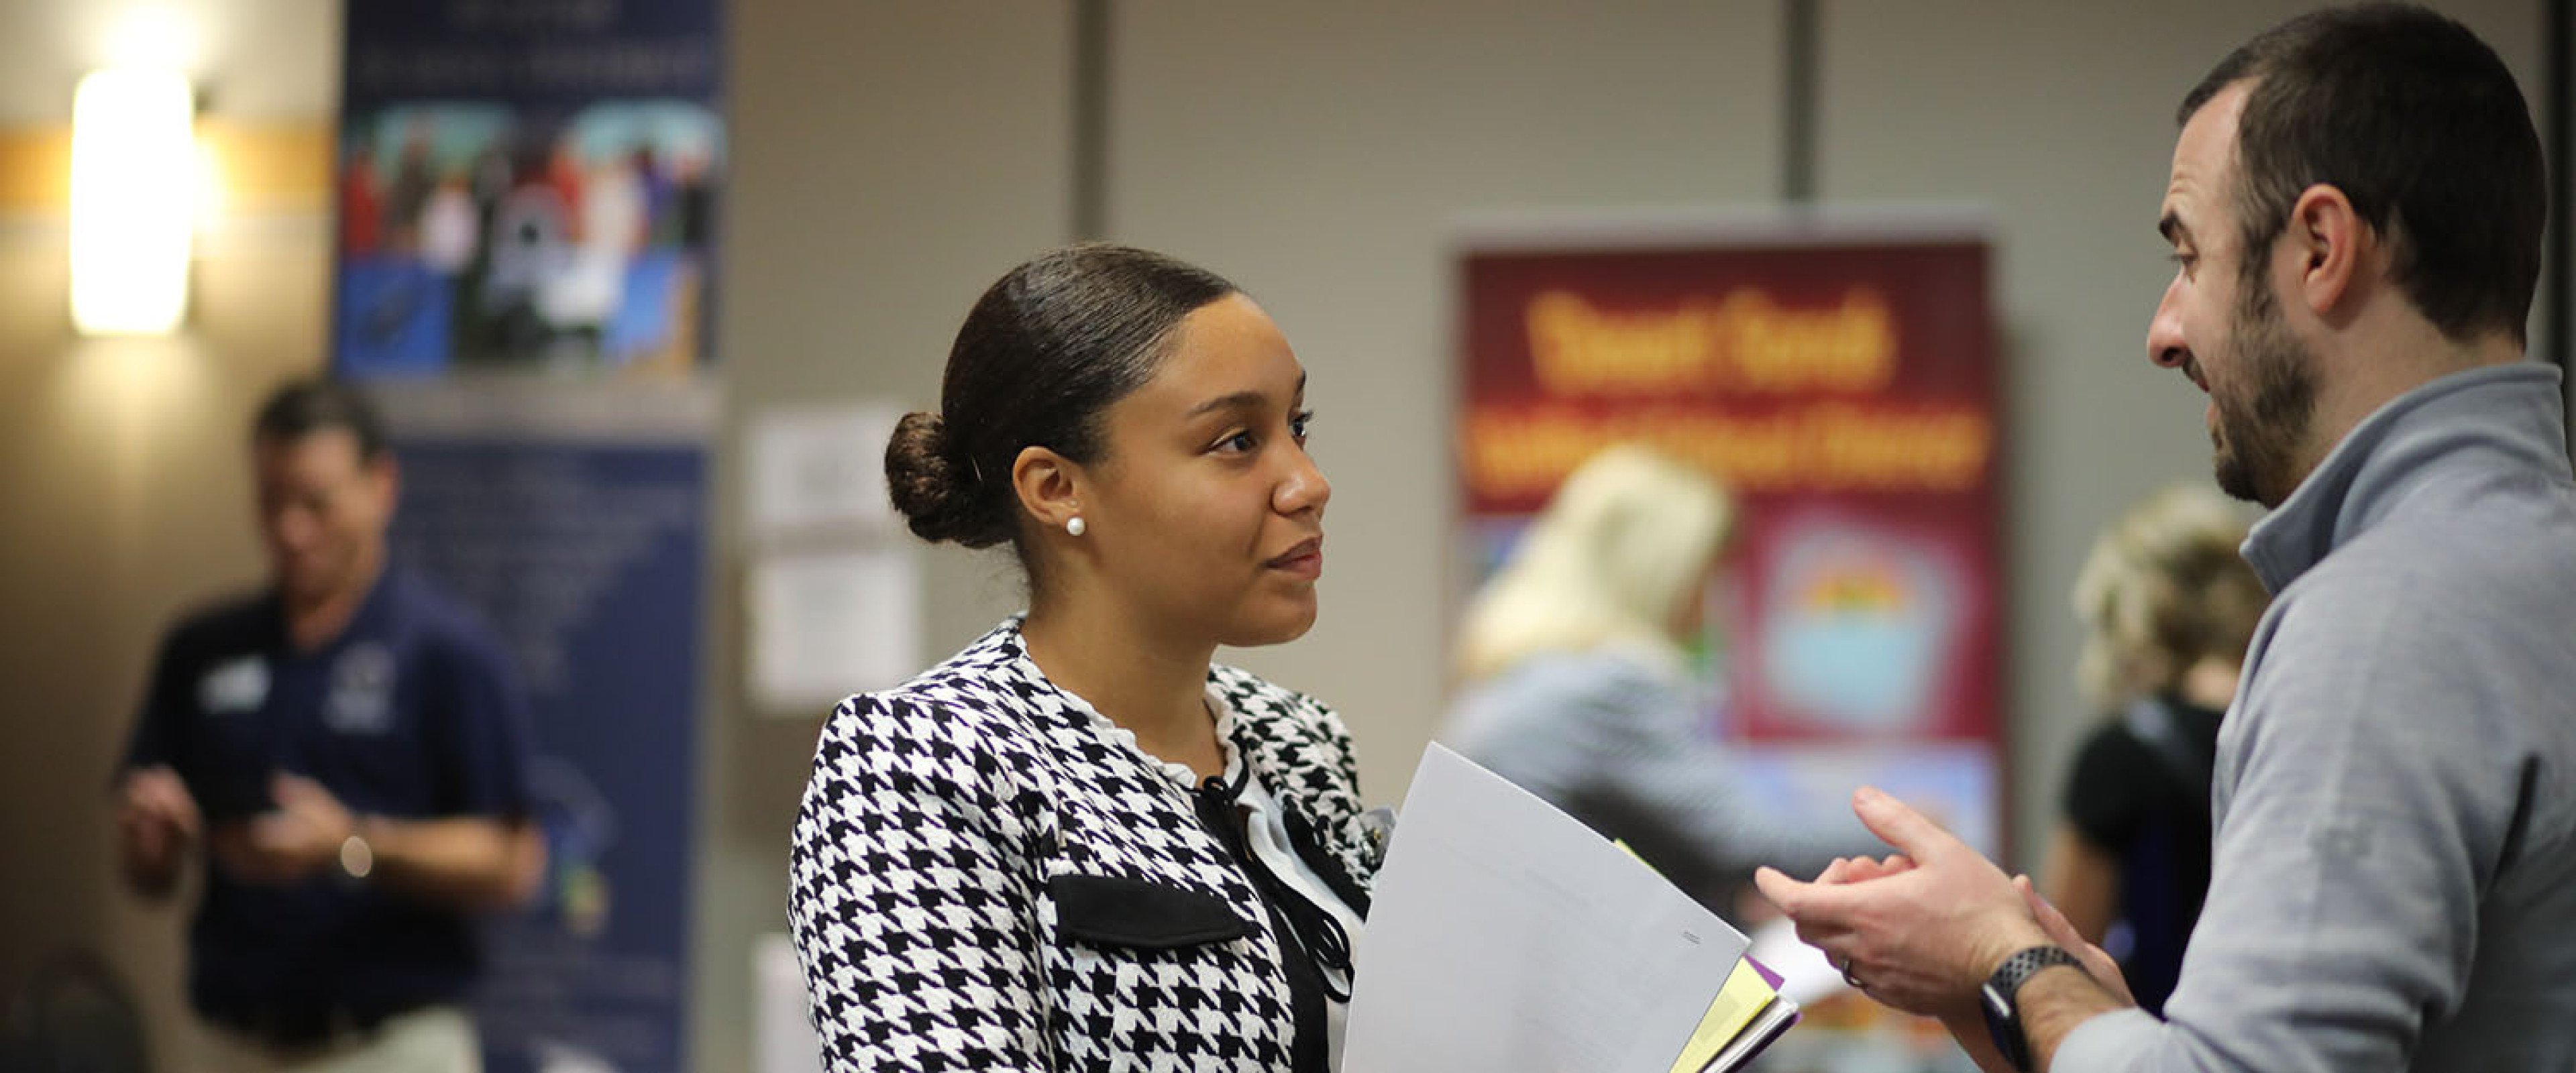 WMU student in professional attire networking with another person.